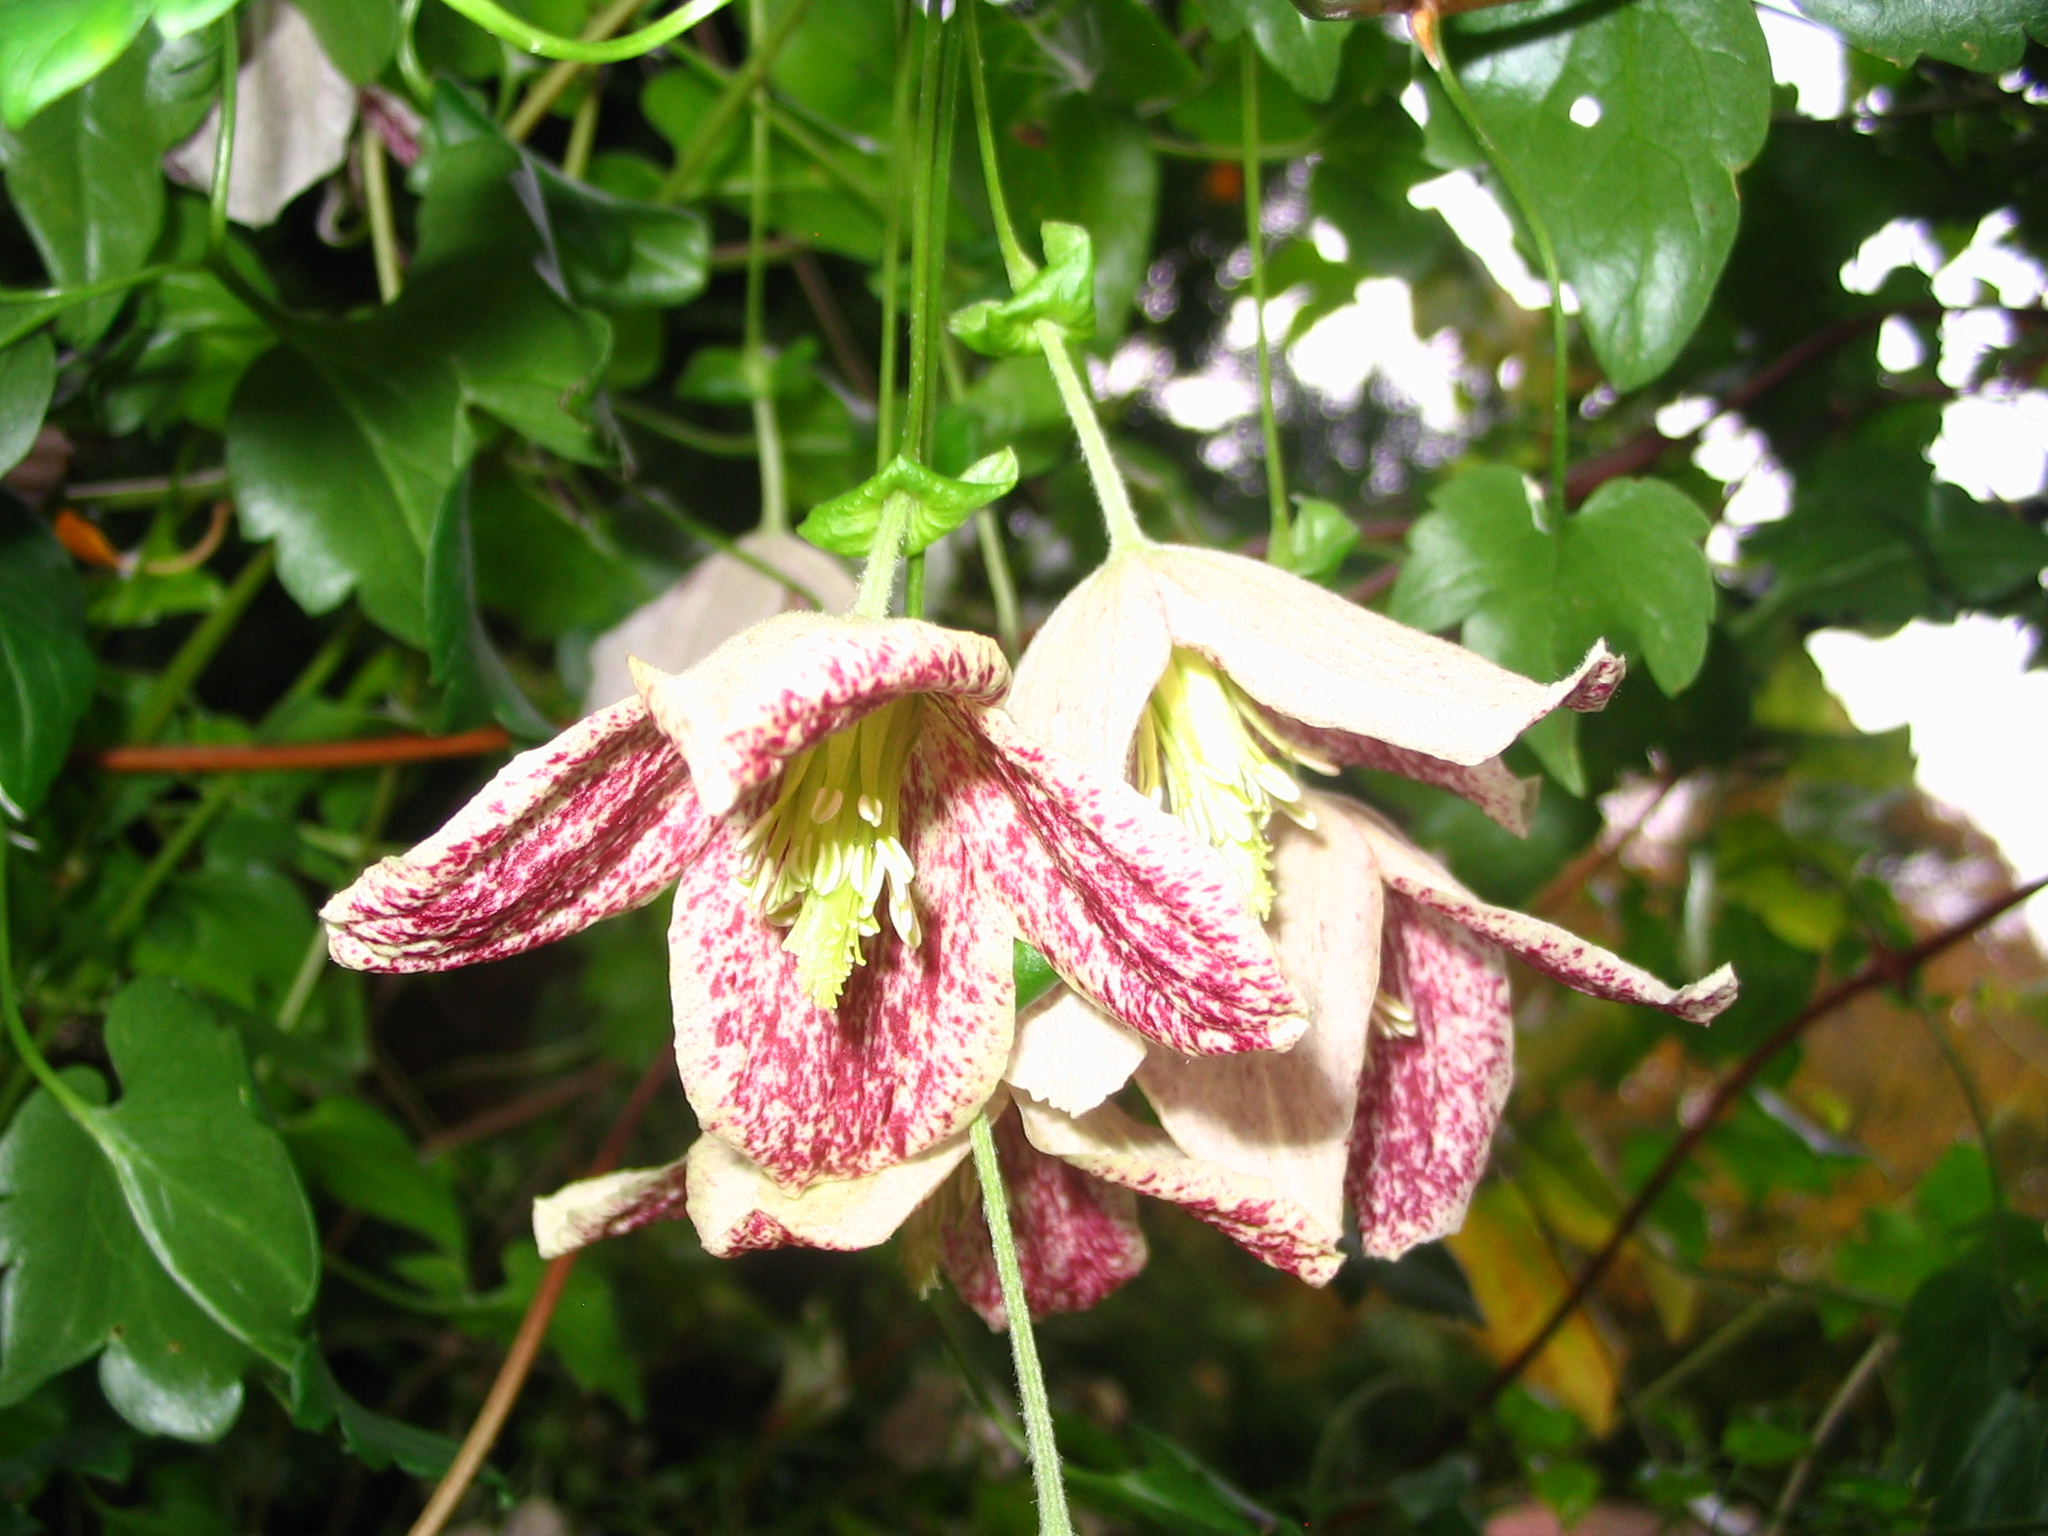 Hardy Climbing Plants. Flowers of the evergreen clematis Freckles